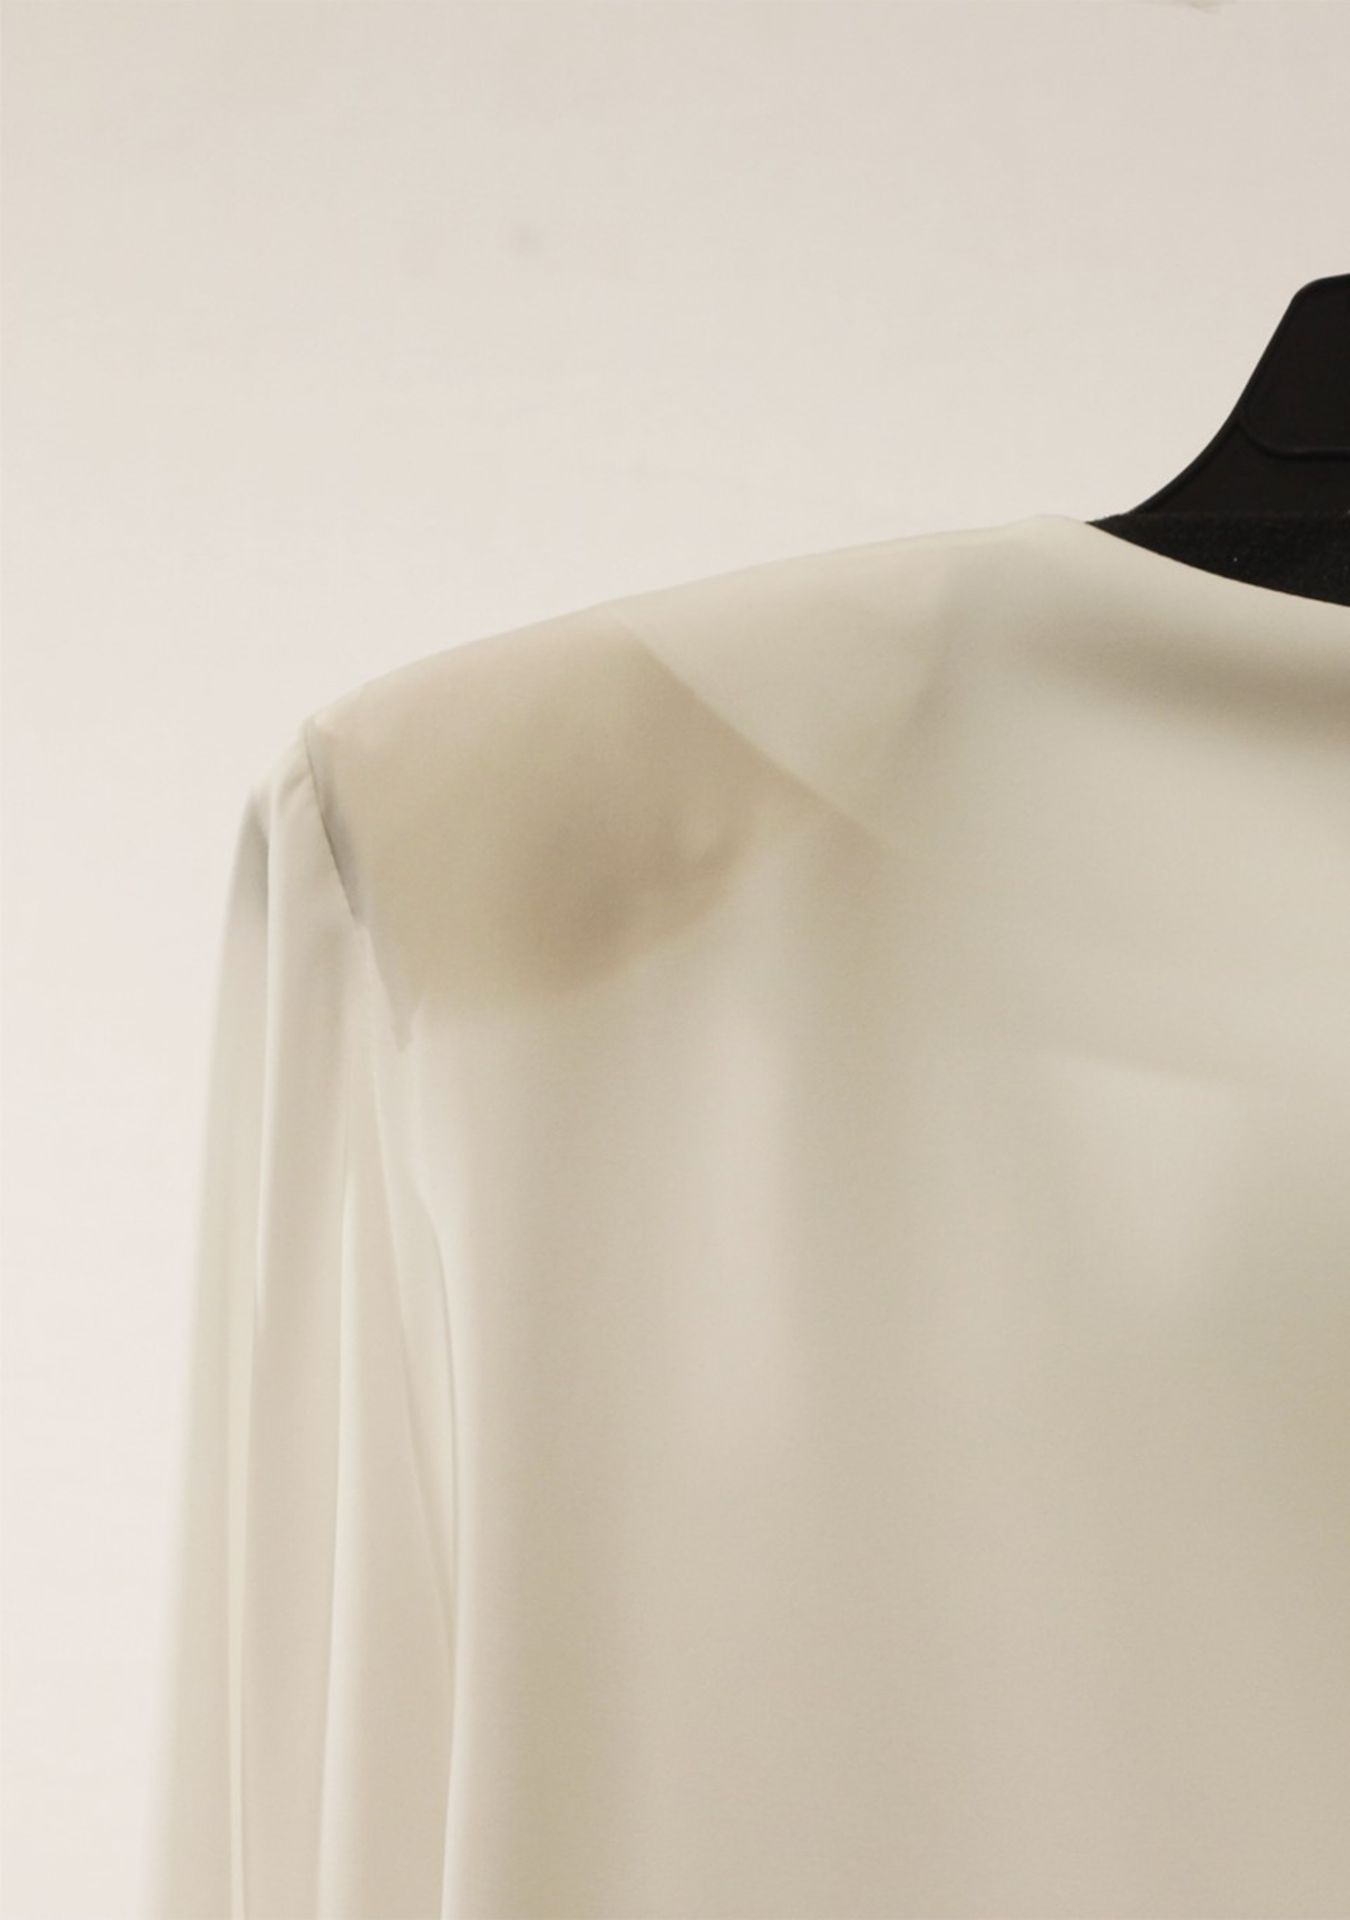 1 x Anne Belin White Shirt - Size: 18 - Material: 100% Polyester - From a High End Clothing Boutique - Image 8 of 9